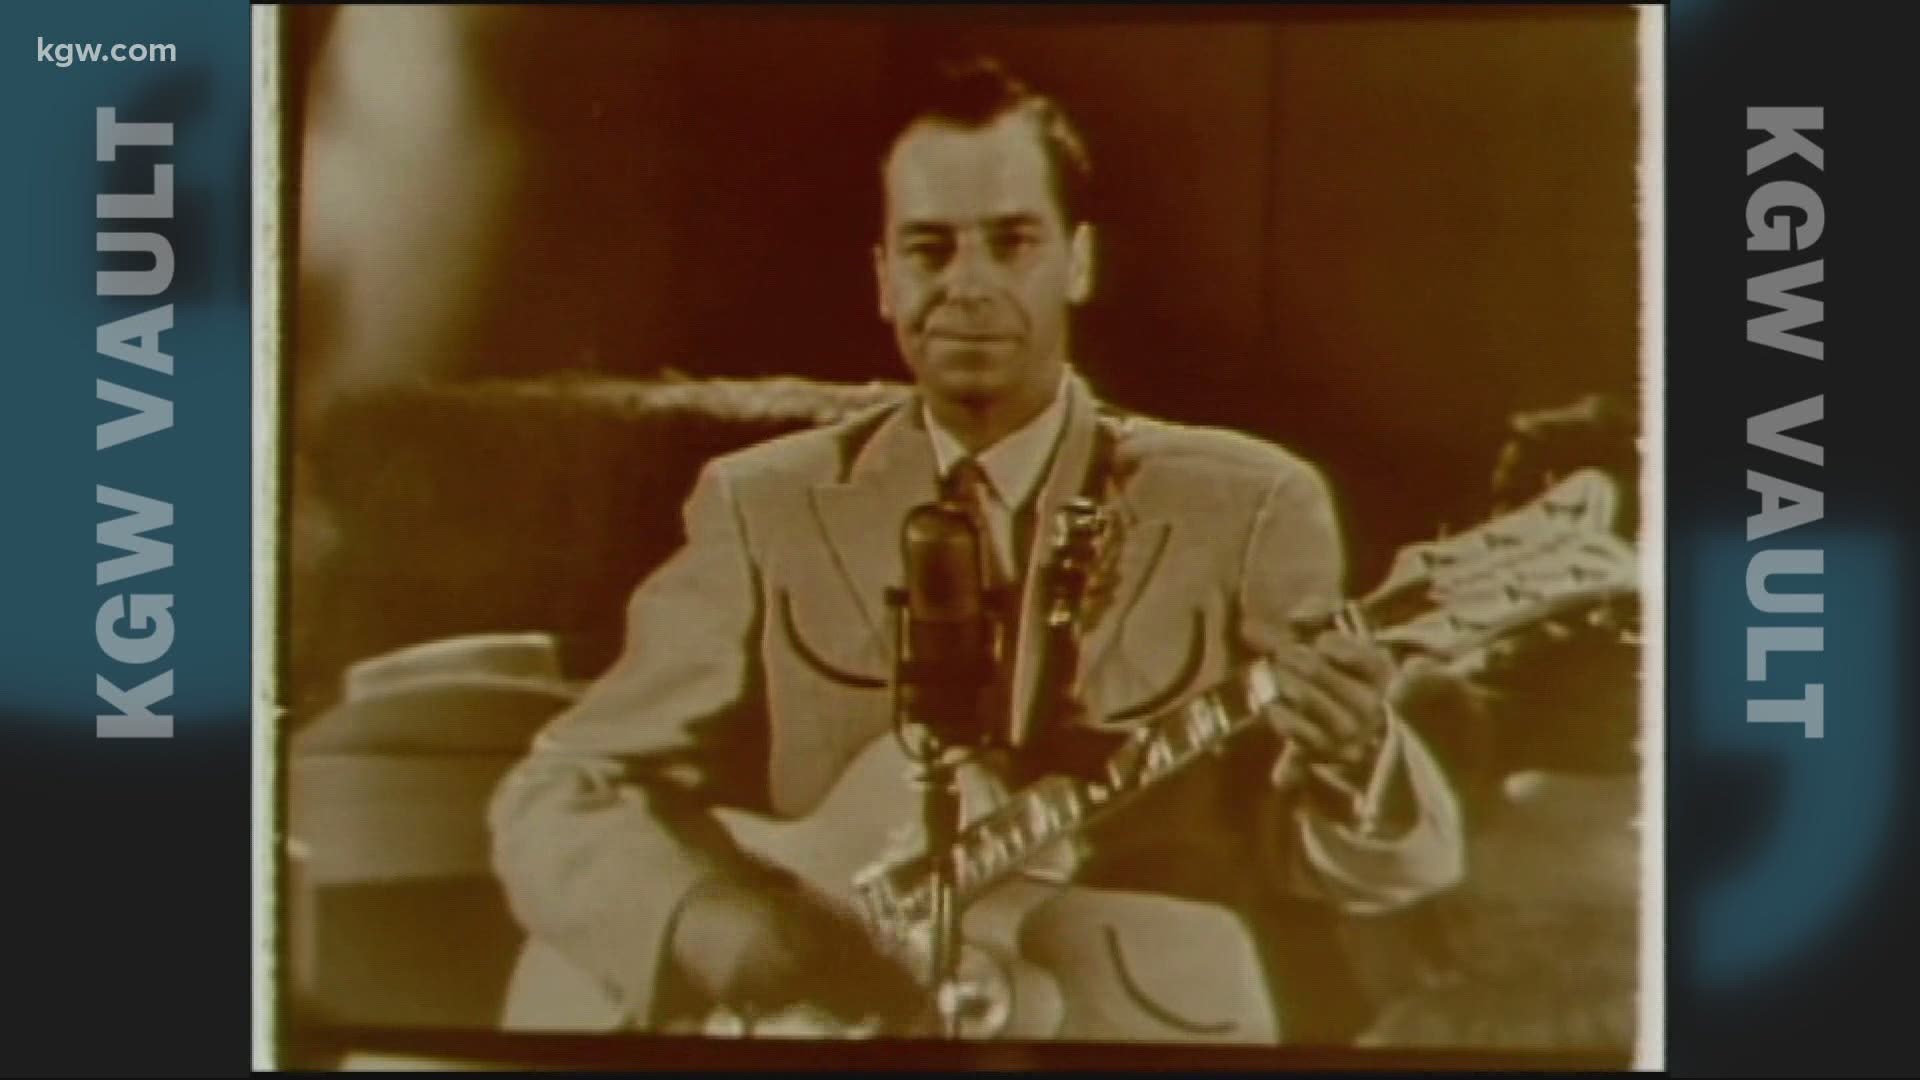 We were able to find a clip in the vault paying tribute to Portland's singing cowboy, Heck Harper, after he died in 1998.